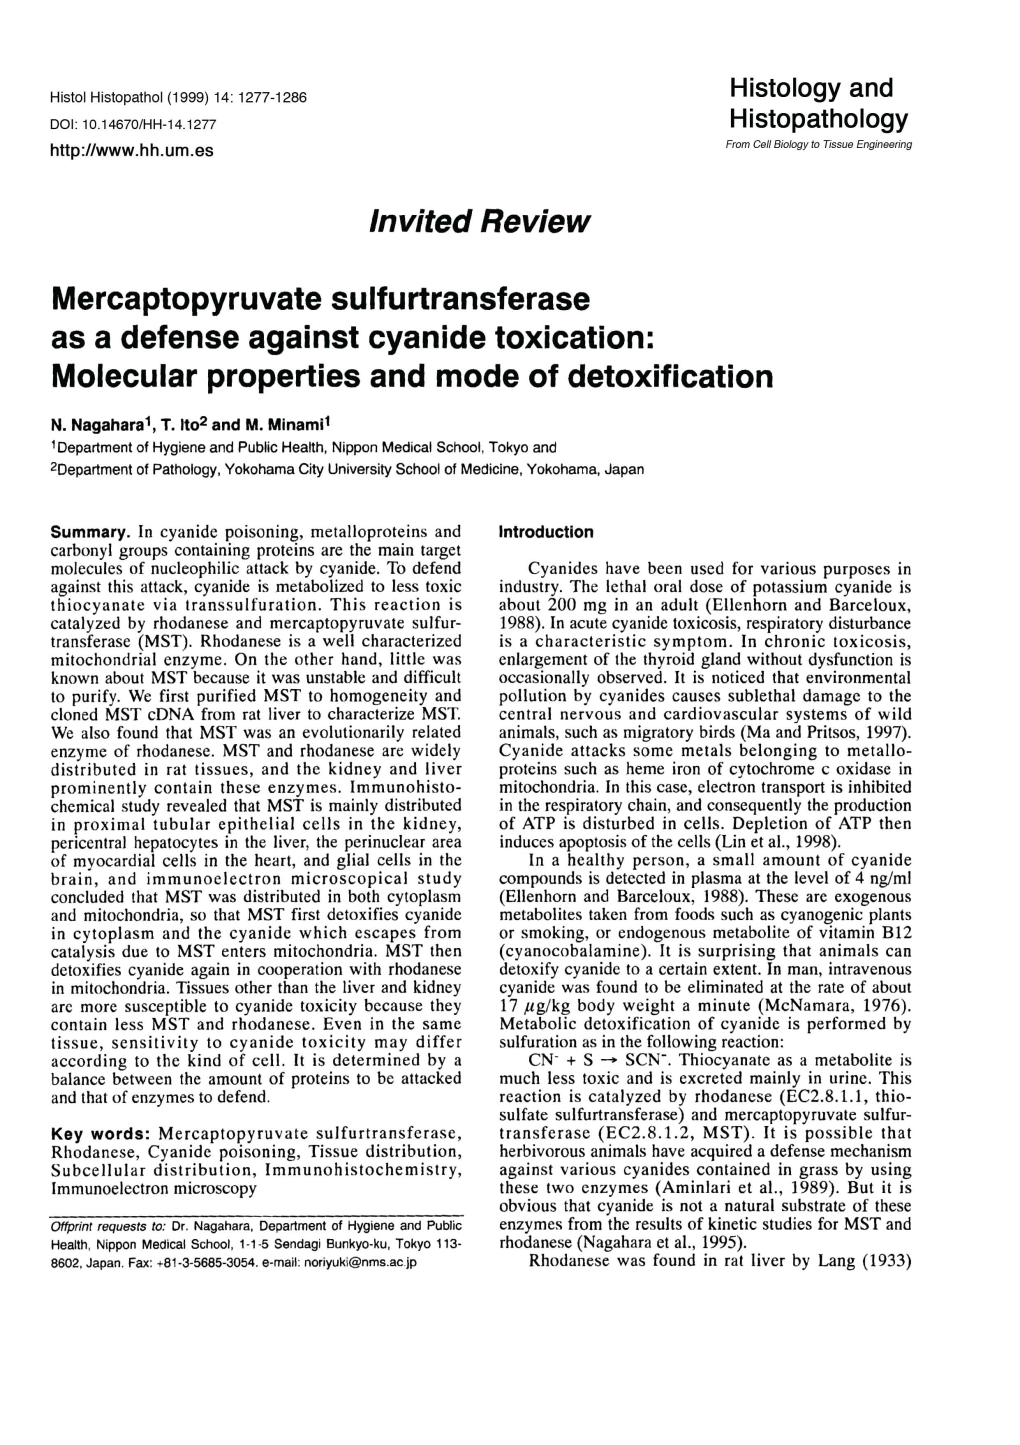 Invited Review Mercaptopyruvate Sulfurtransferase As a Defense